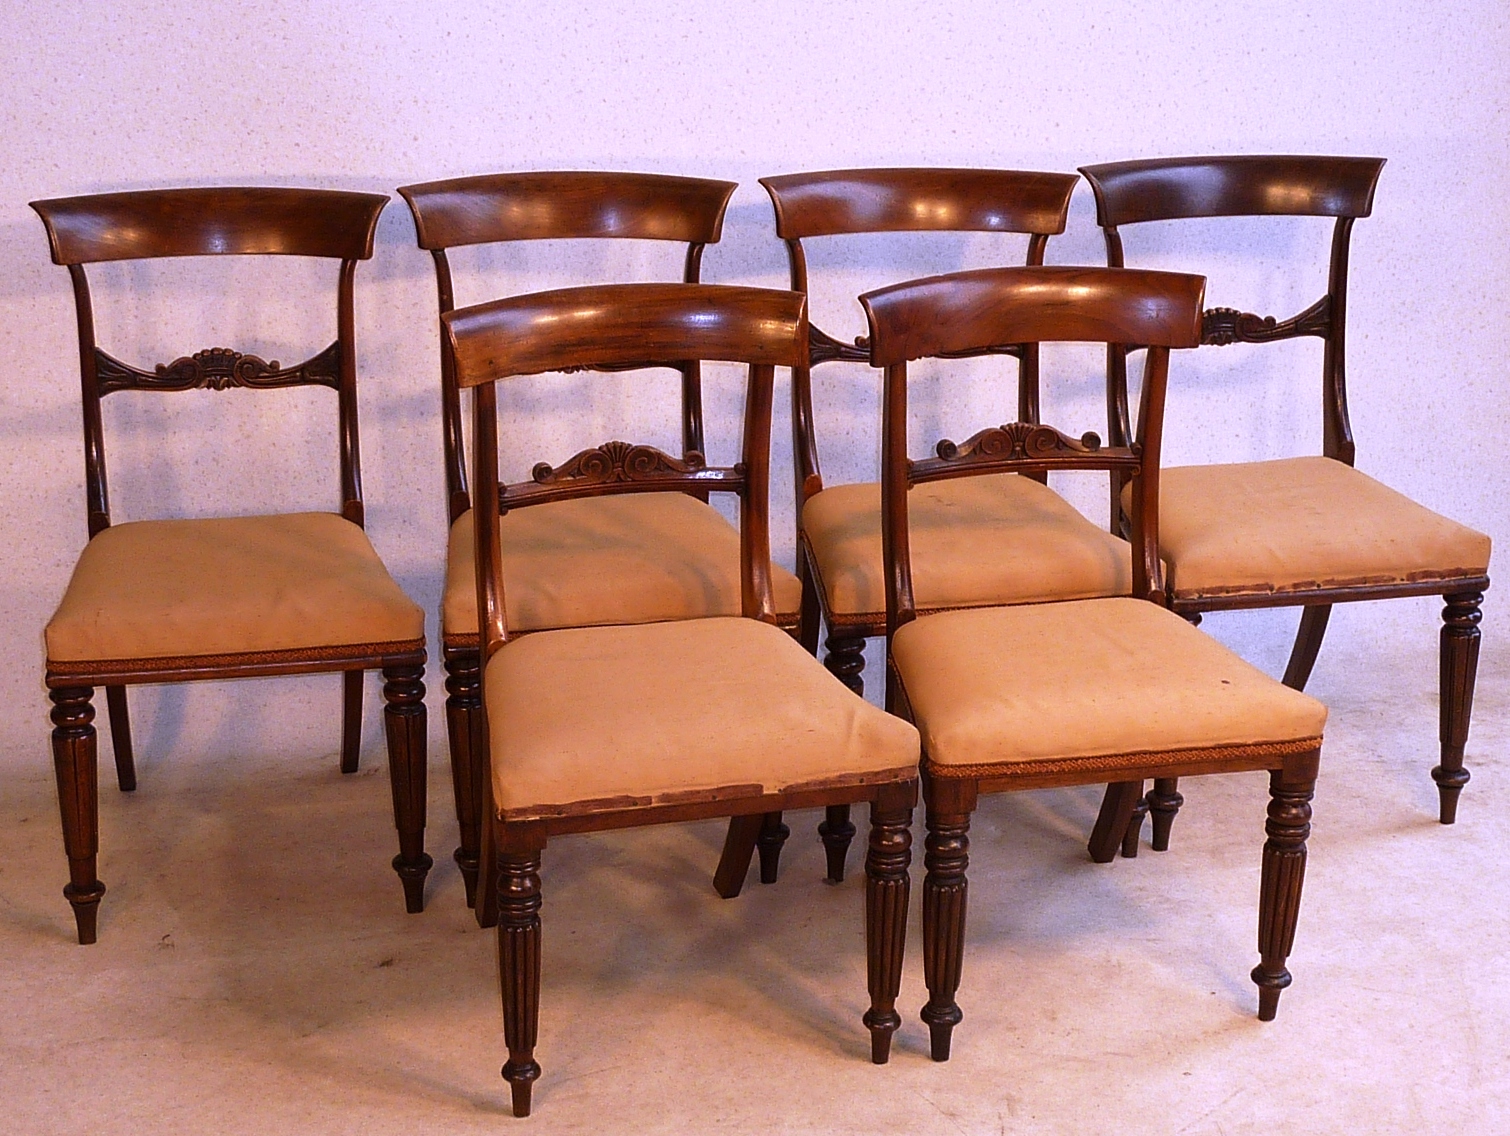 A Harlequin set of 19th Century mahogany Dining Chairs (4+2) in the late Regency style, two having